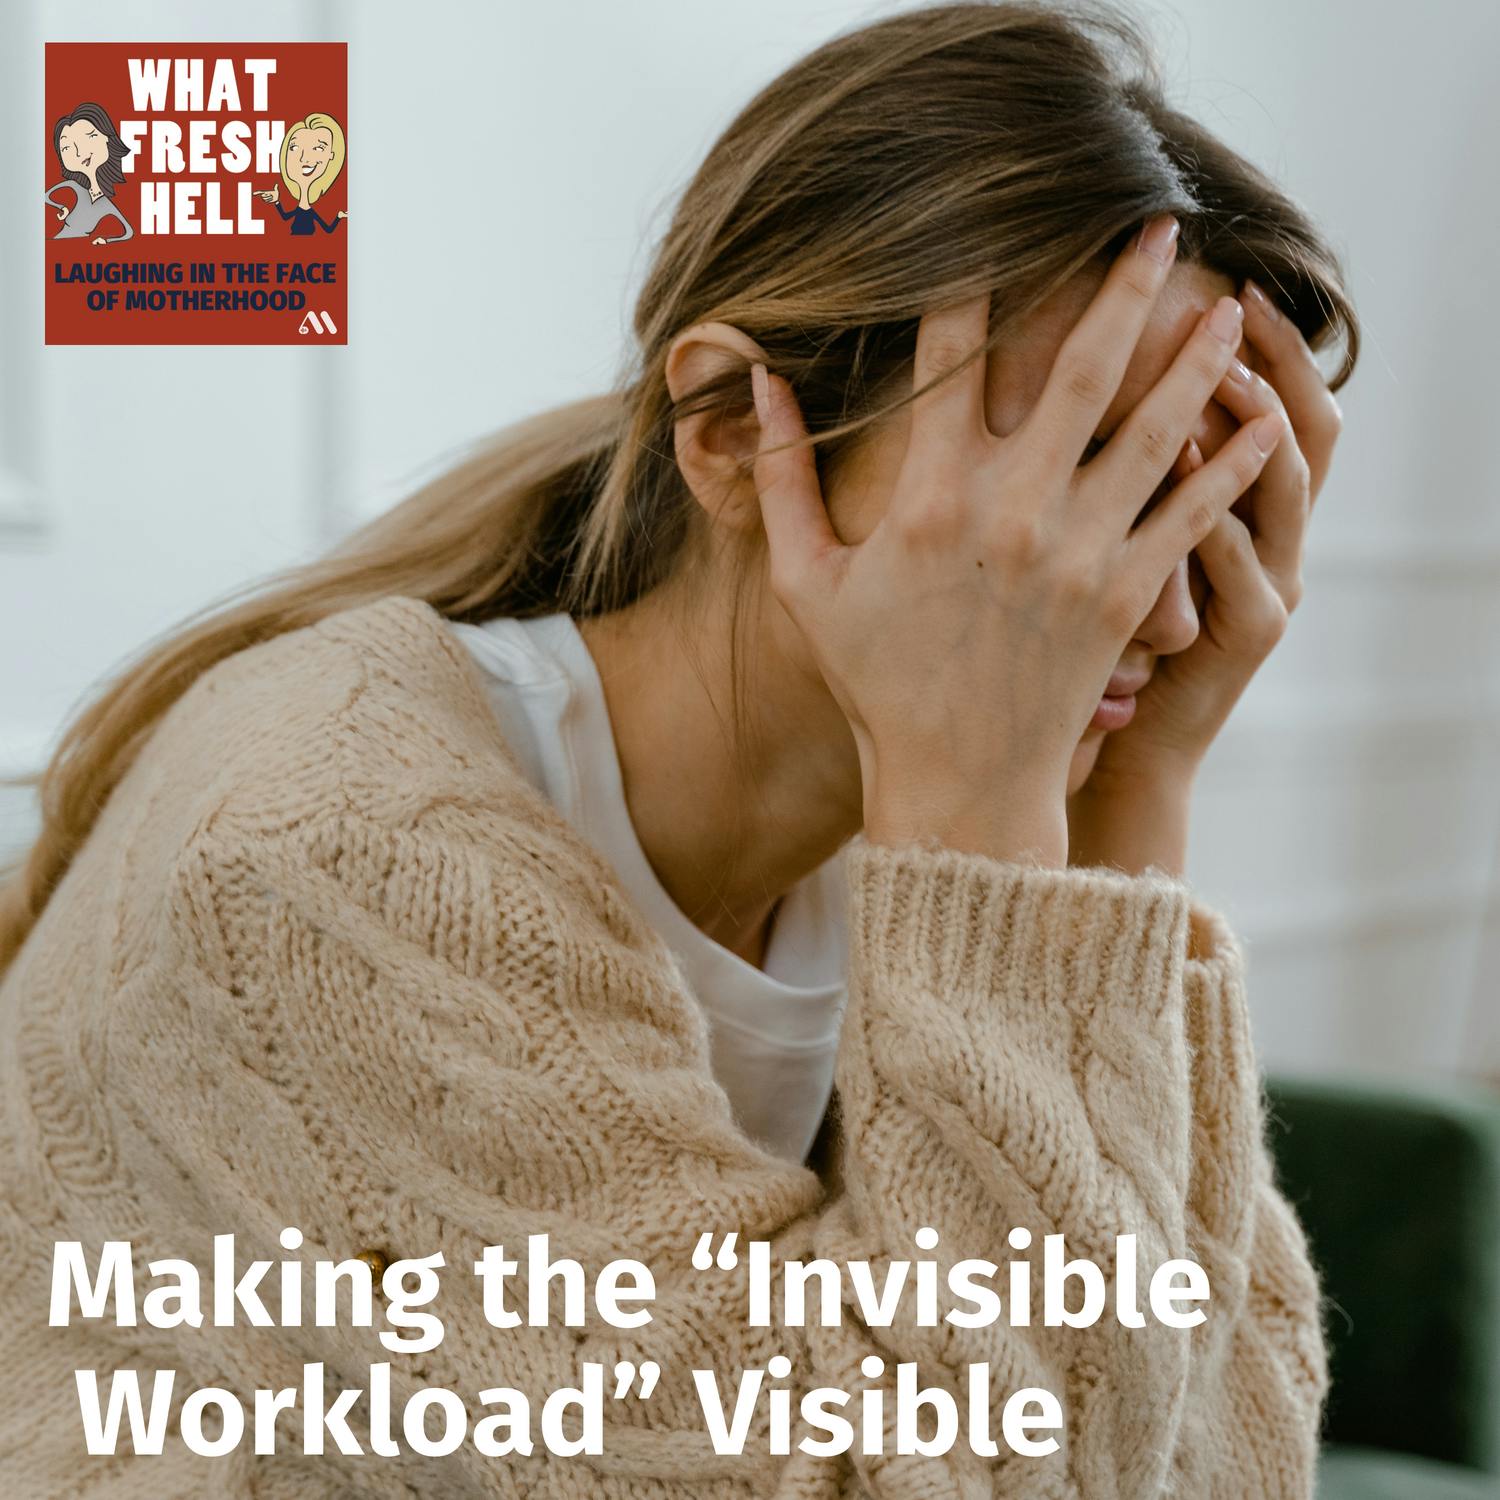 Making the "Invisible Workload" Visible